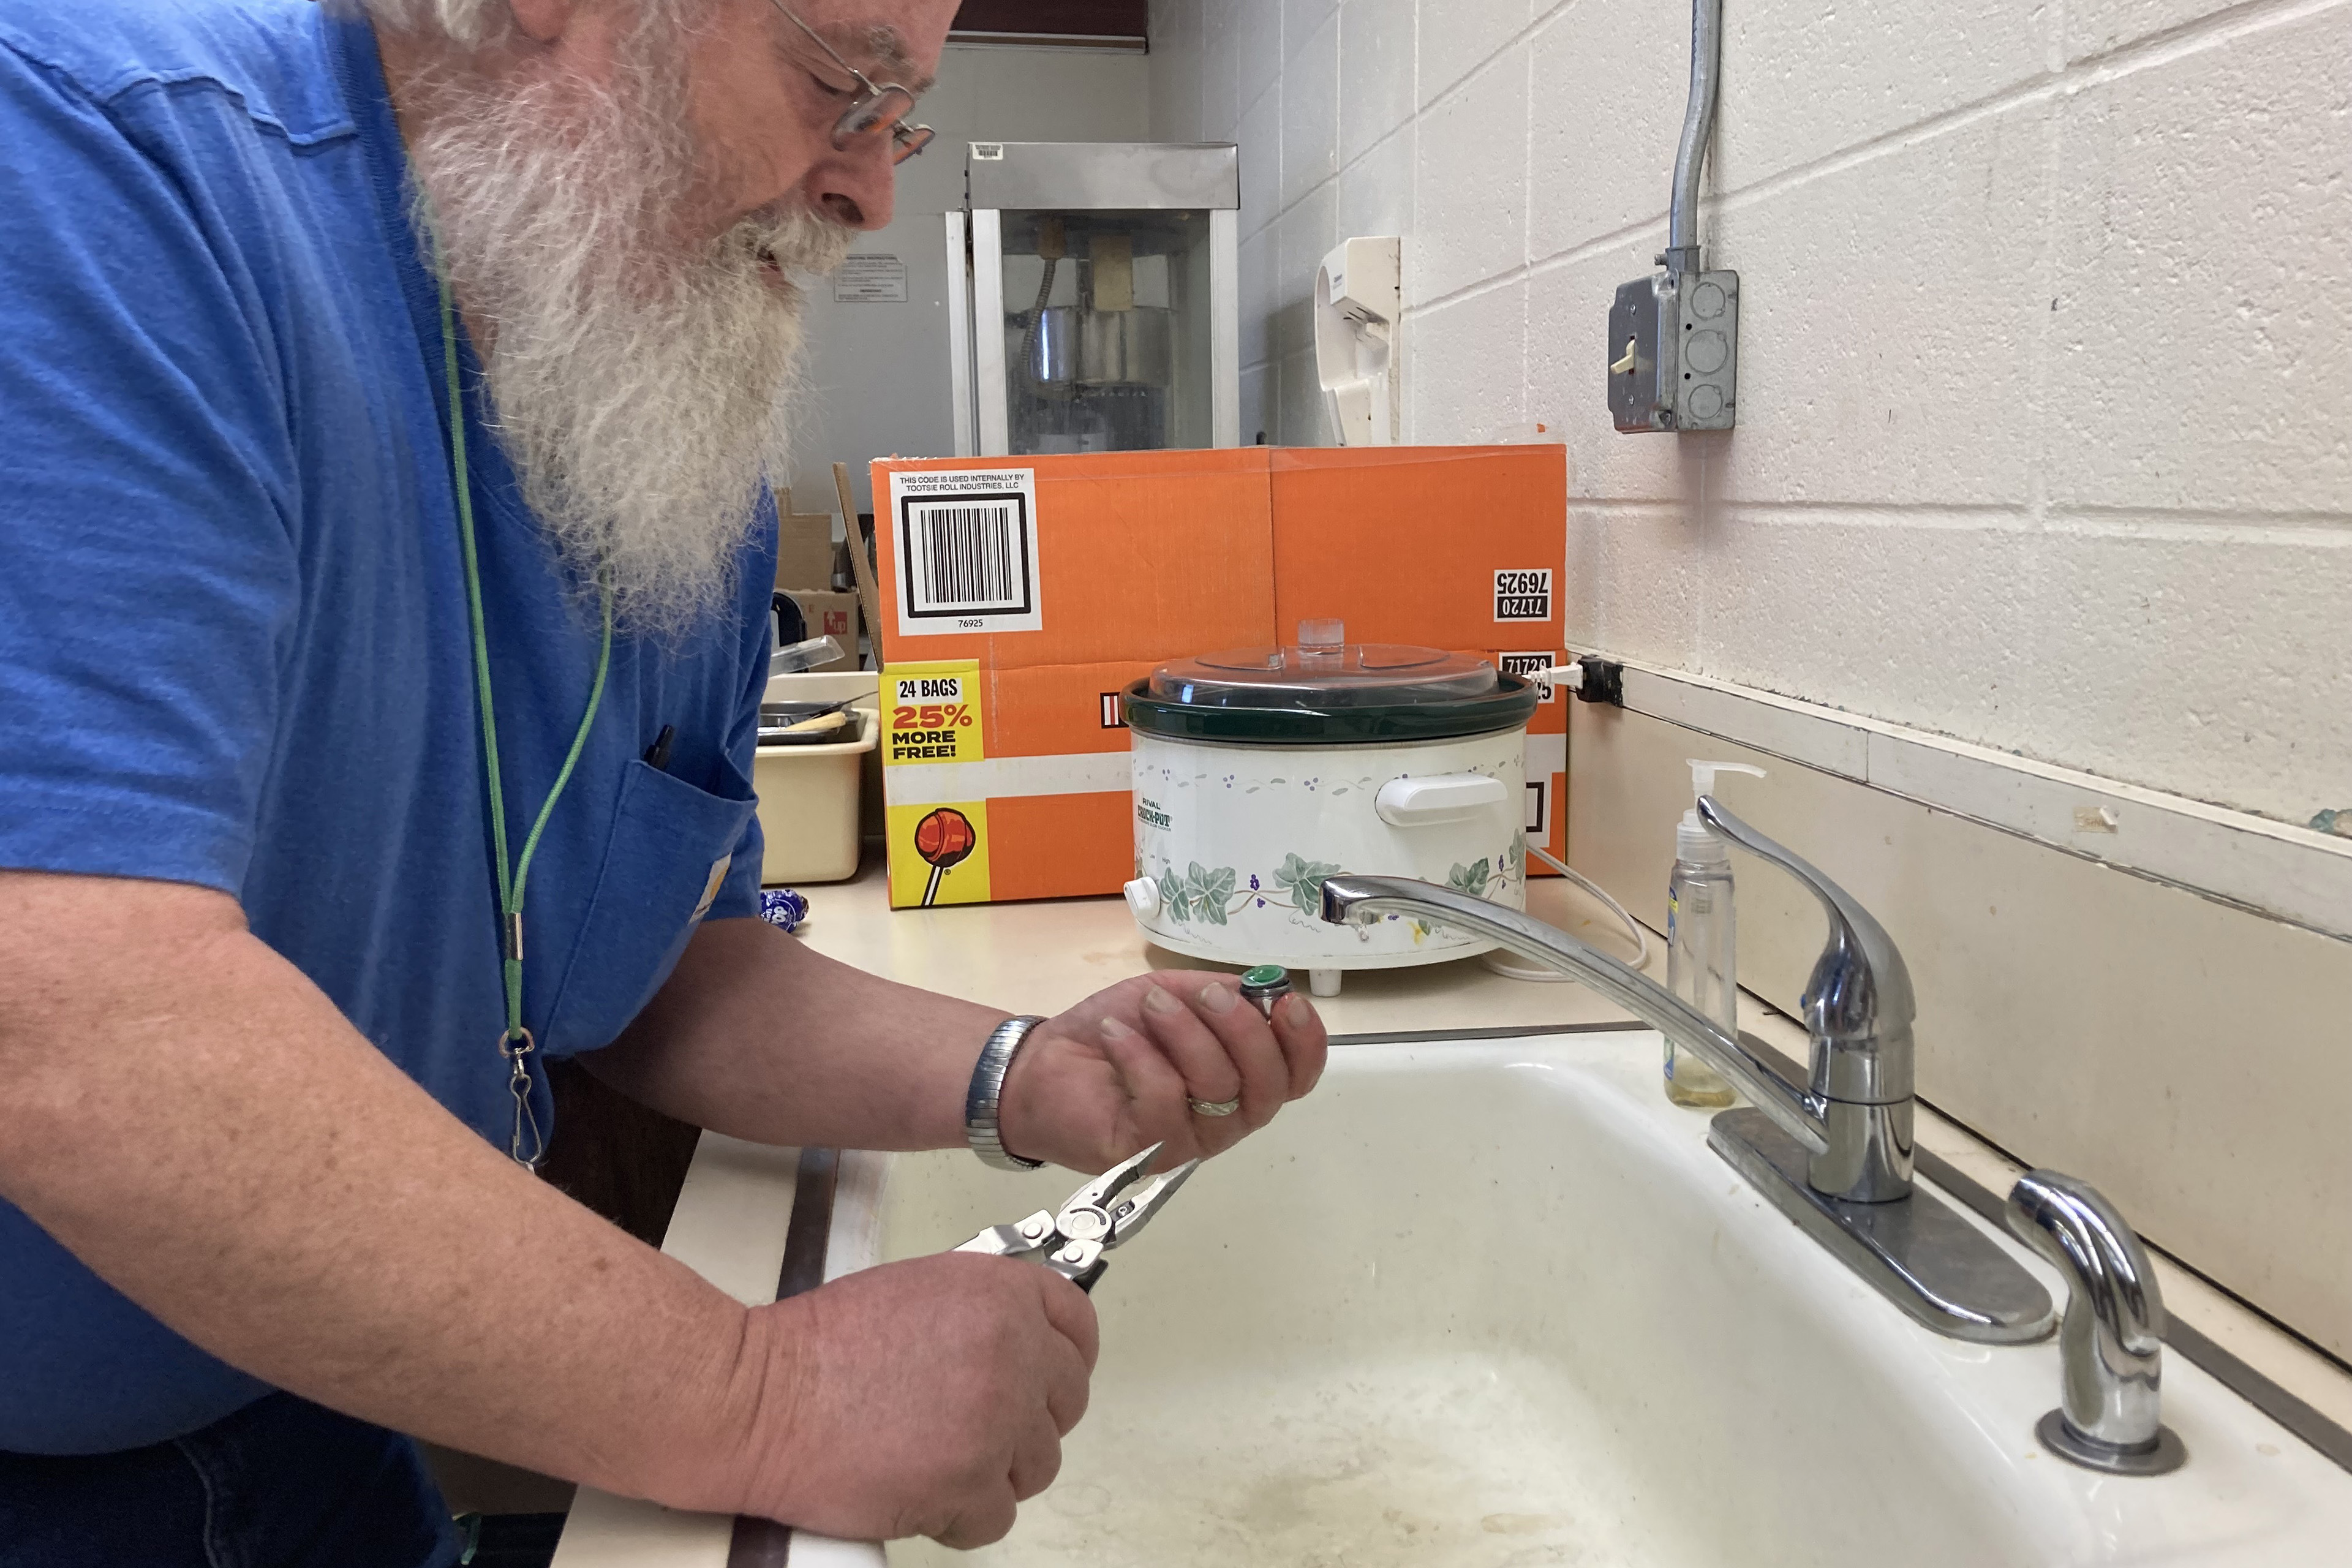 Chris Cornelius is leaning over a sink examining a faucet which he has removed. In his other hand, he holds a wrench.